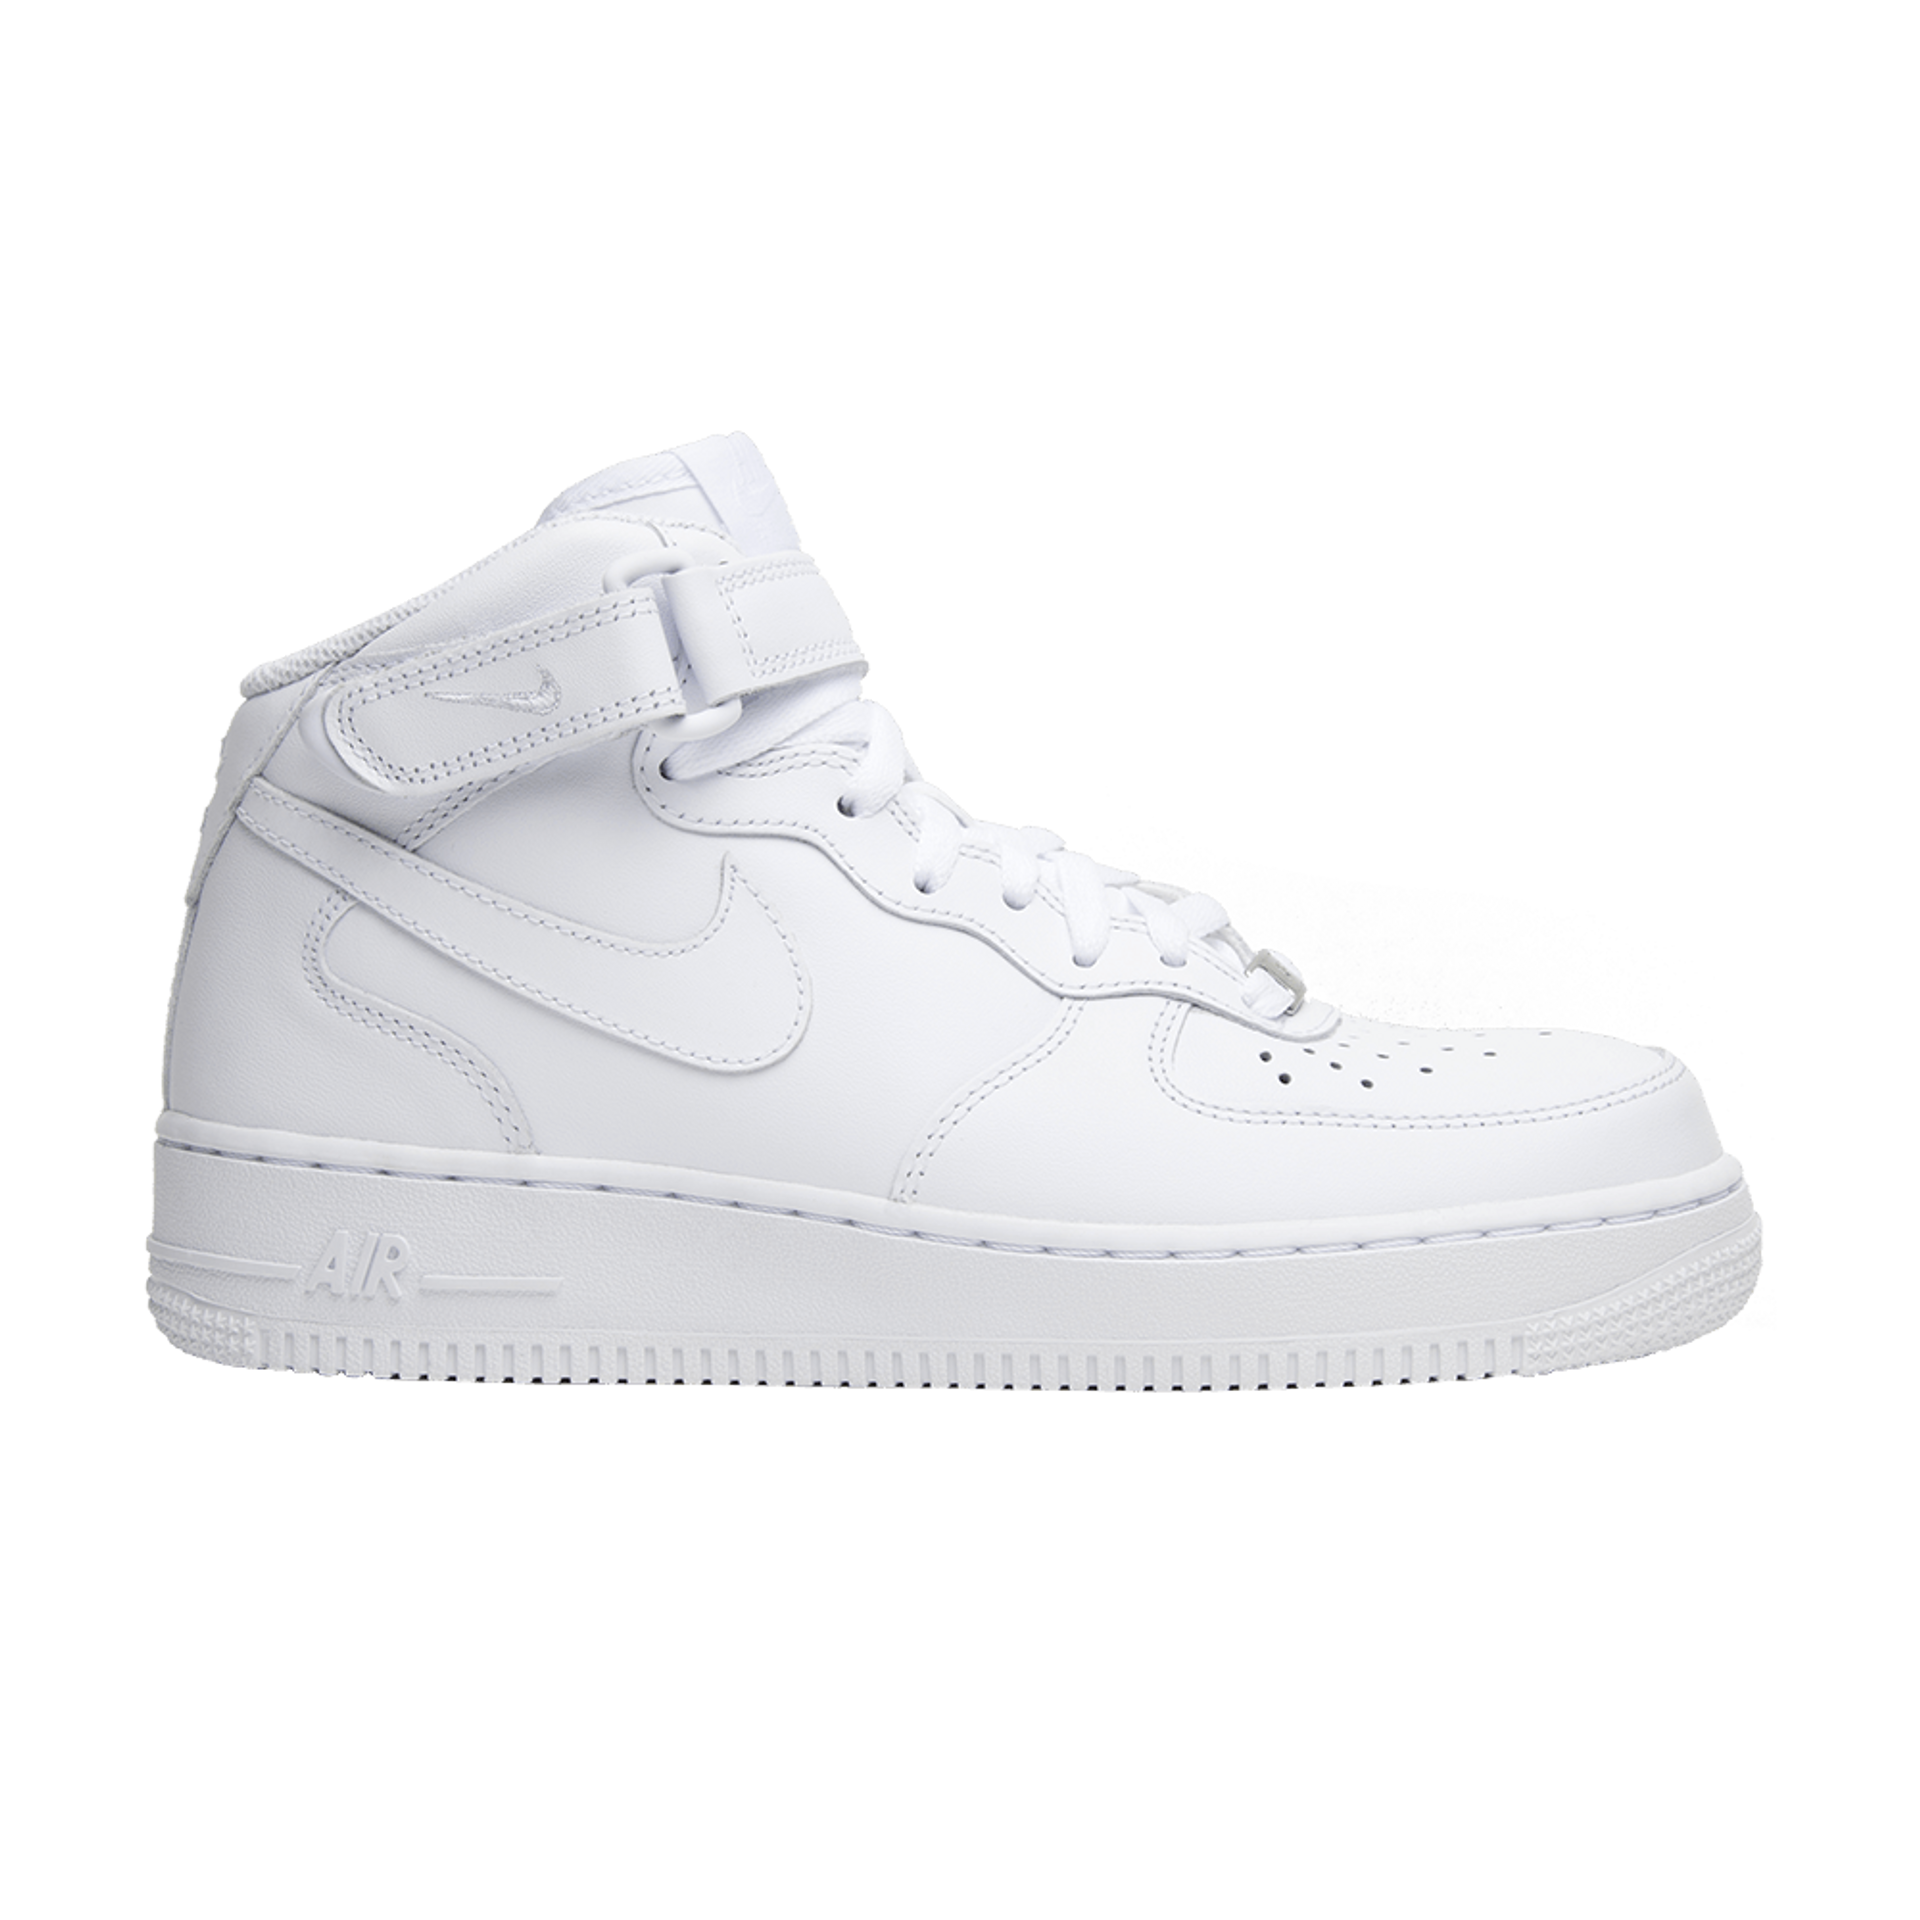 Nike Wmns Air Force 1 Mid 07 Leather 'Triple White' - 366731 100 | Ox ...